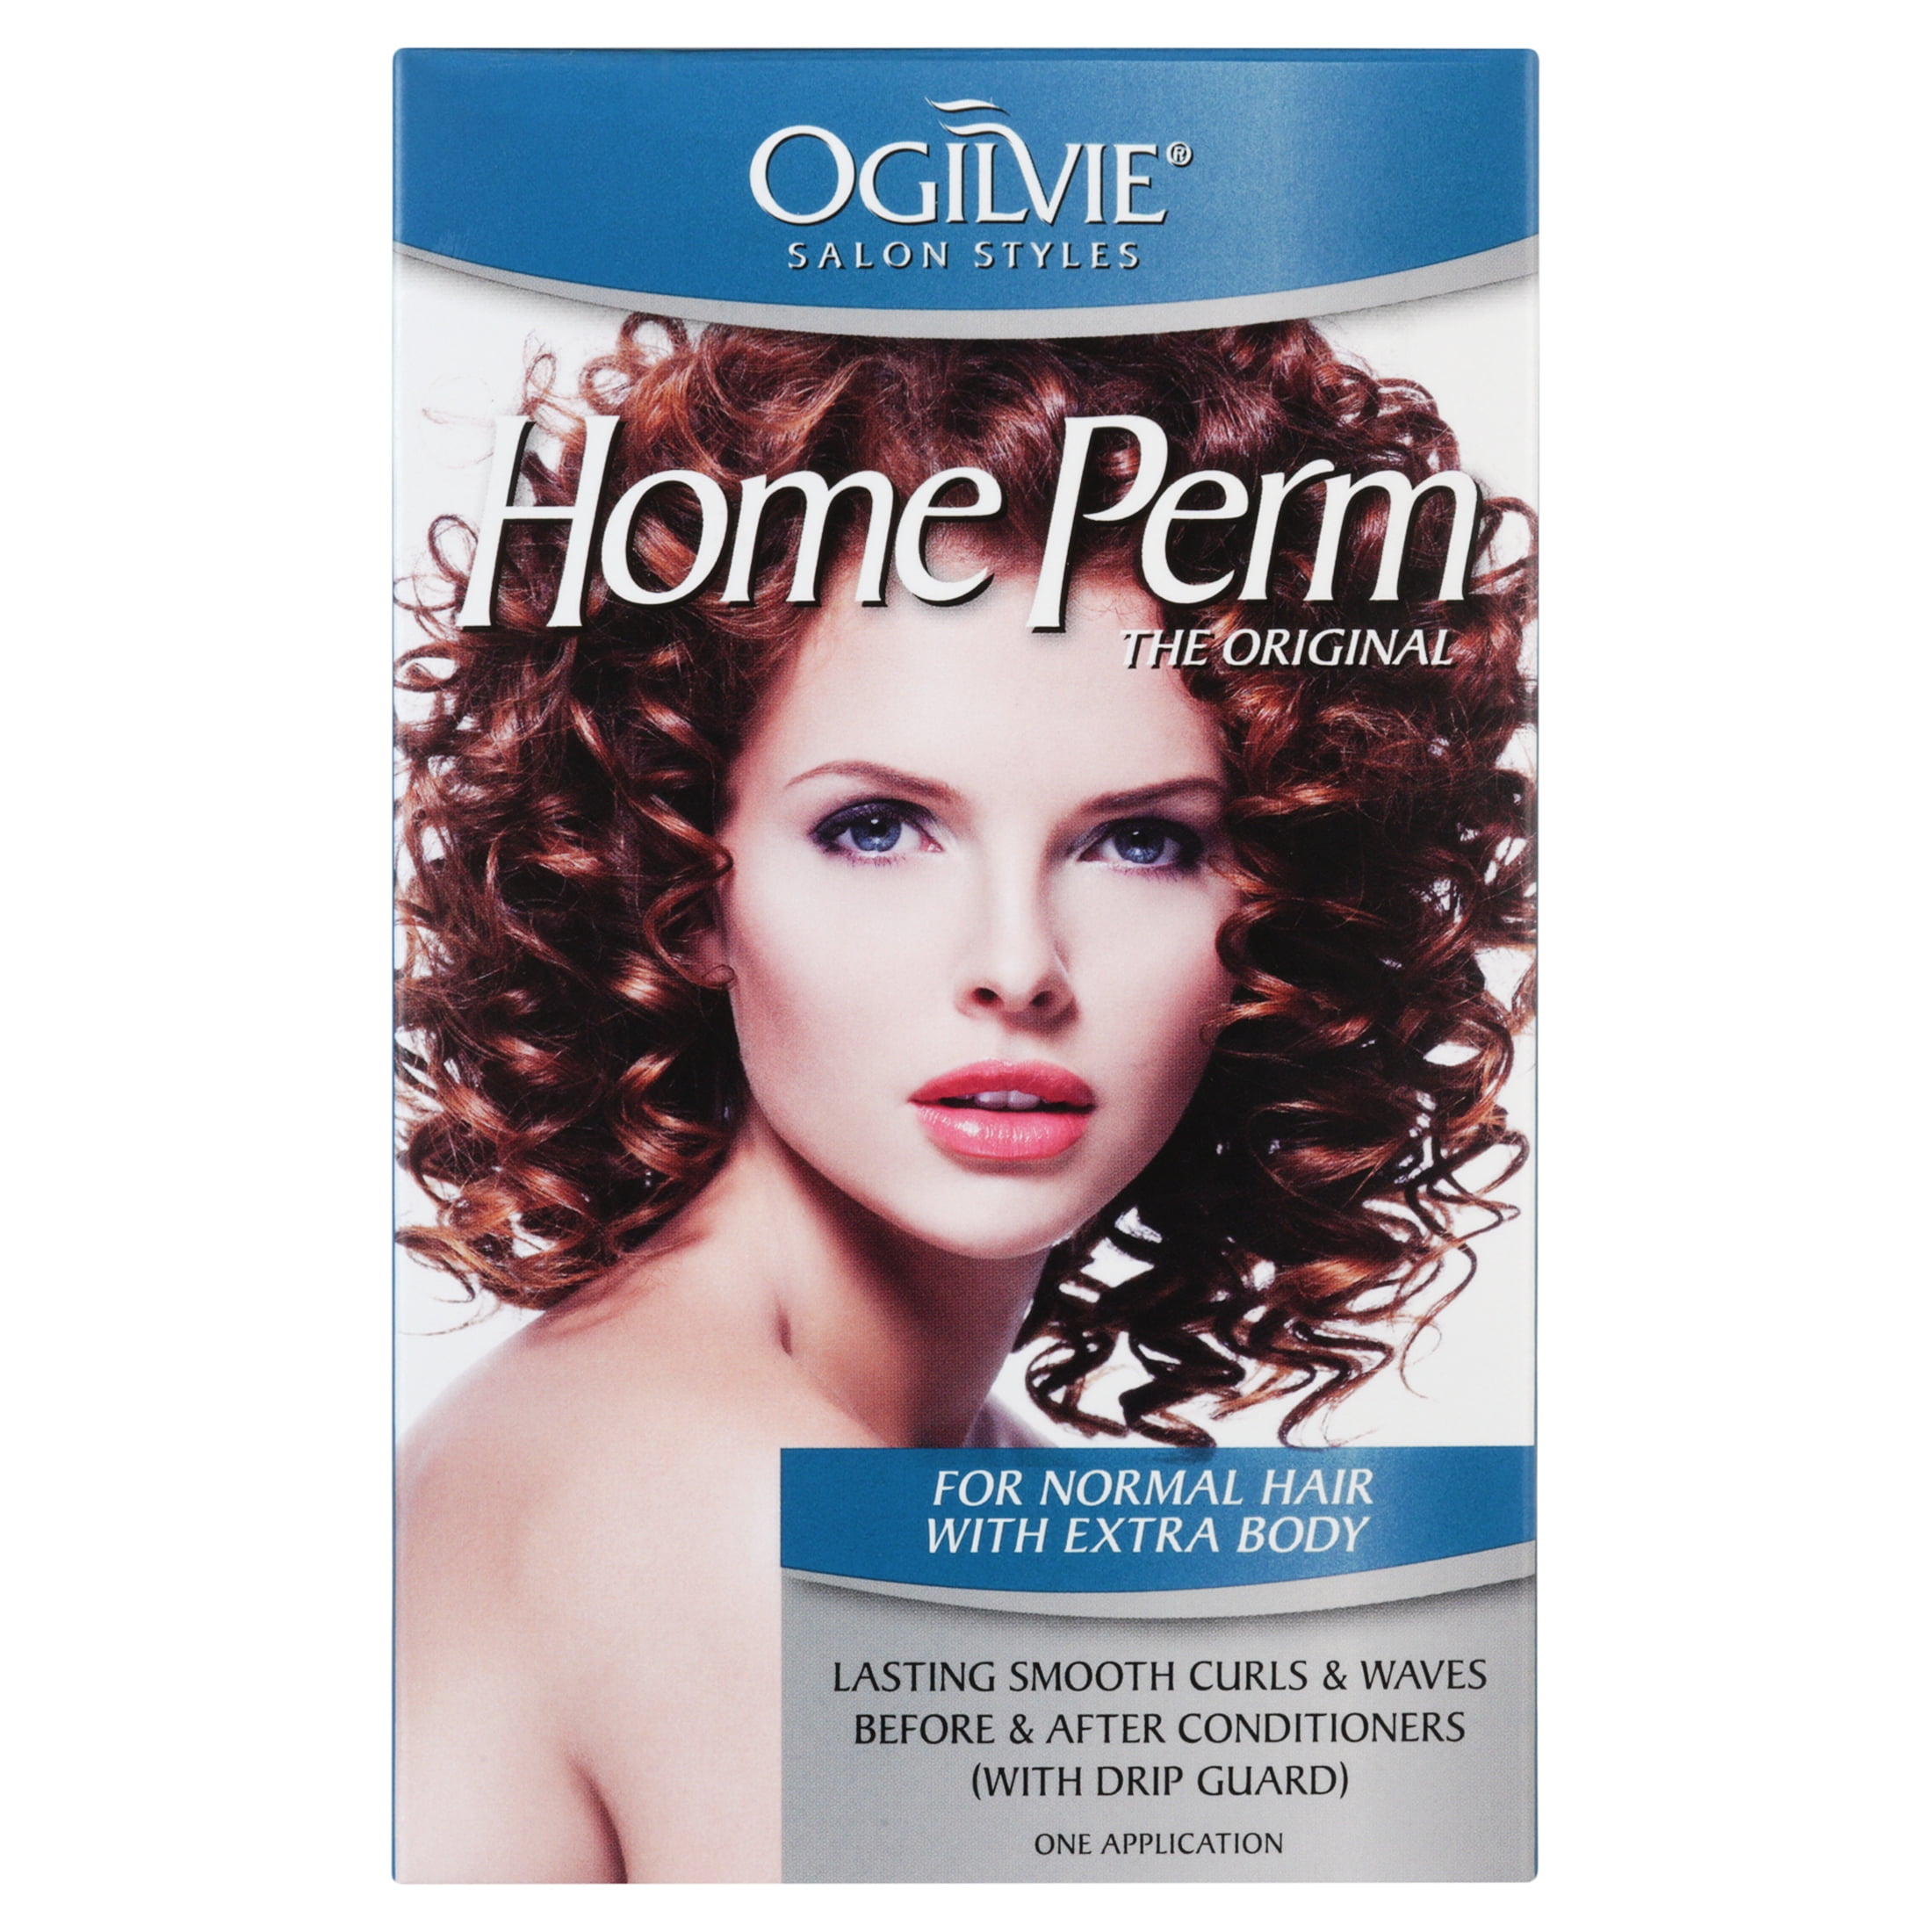 Ogilvie Home Perm for Normal Hair with Extra Body, 1 Application -  